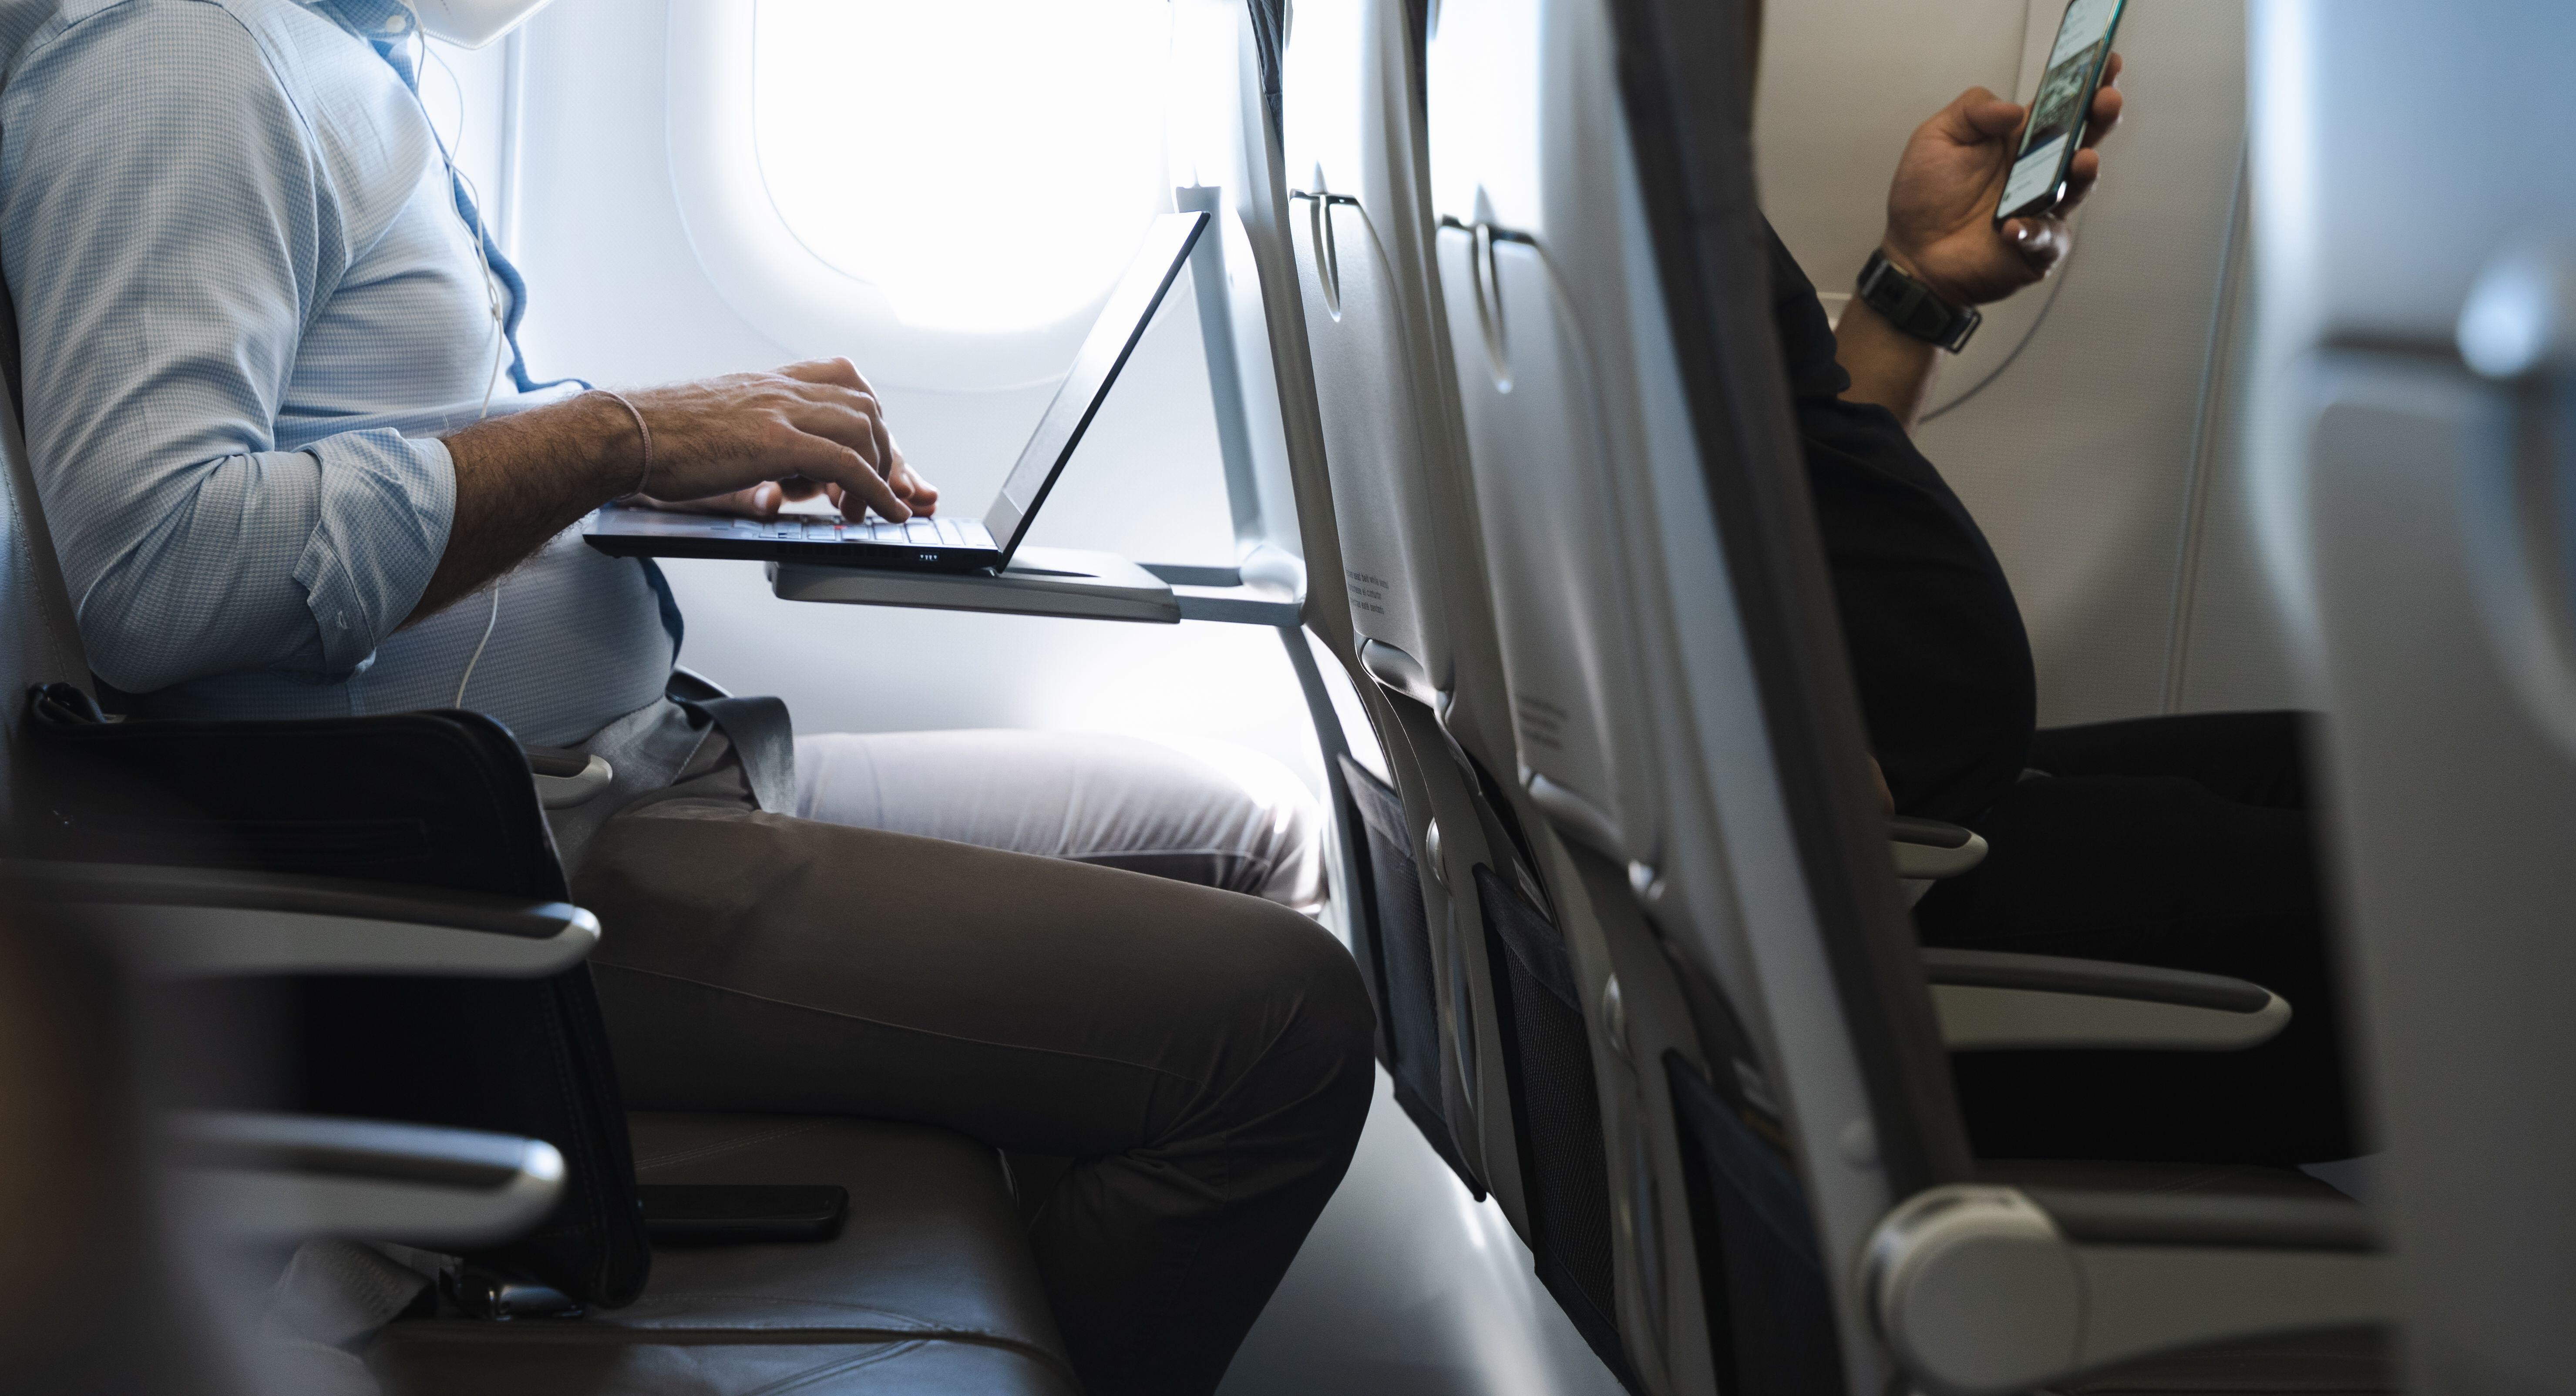 From Dark Reading – Hacker Busted for ‘Evil Twin’ Wi-Fi That Steals Airline Passenger Data